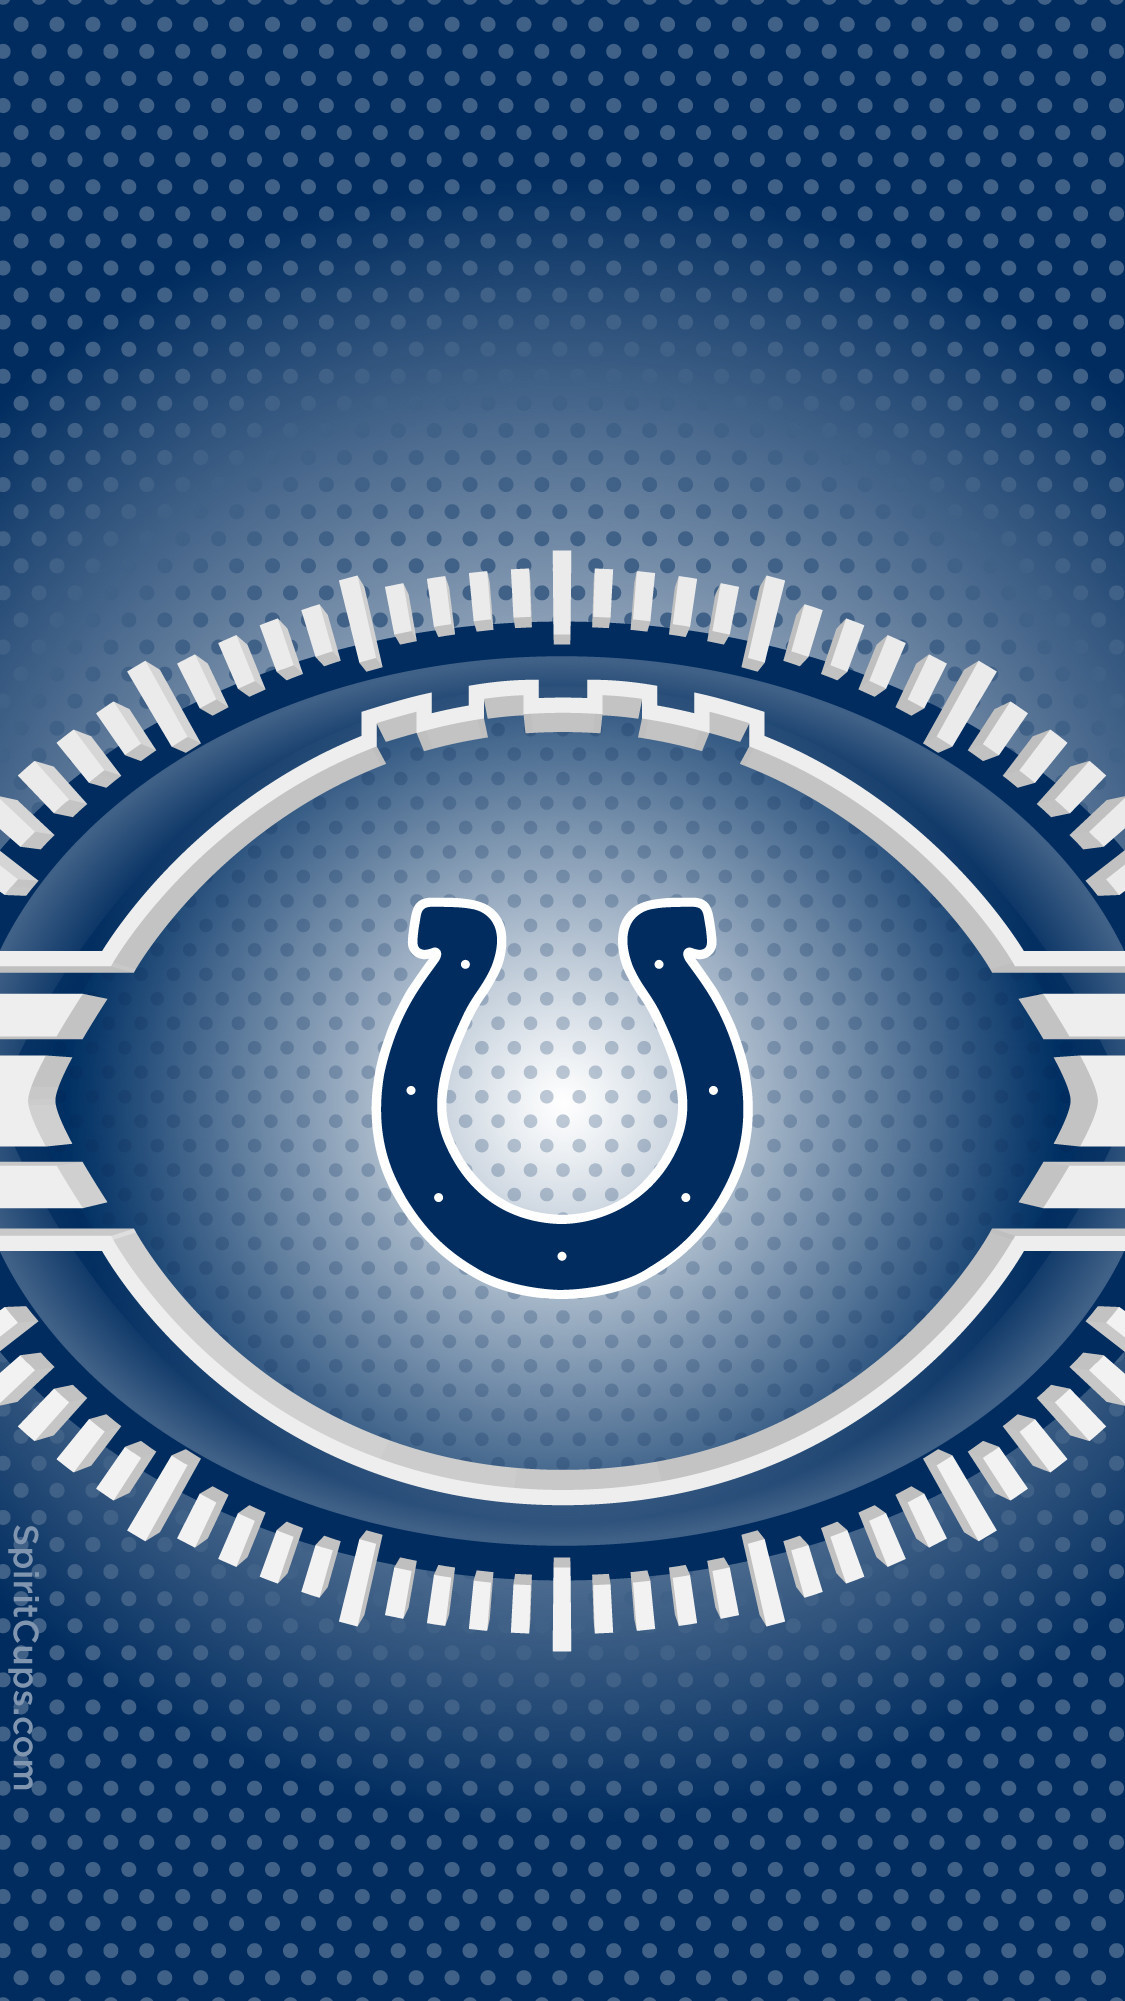 Indianapolis Colts Logo Wallpapers  Top 30 Best Indianapolis Colts Logo  Wallpapers  HQ 